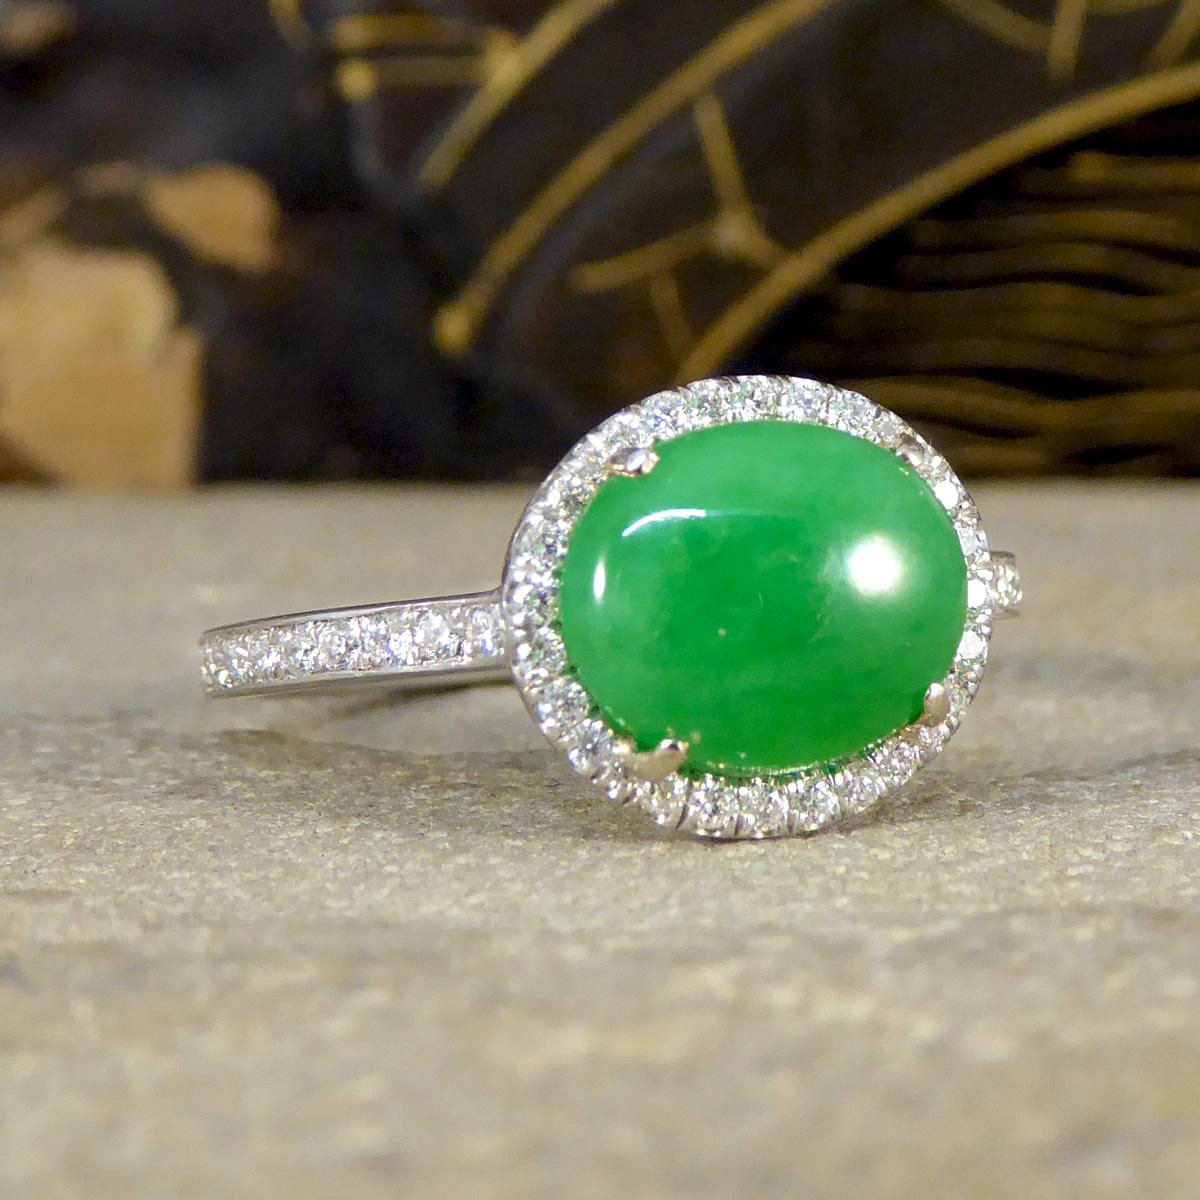 The most dainty and elegant Jade and Diamond cluster ring. Featuring in this ring is a bright and vibrant Jade measuring 9.5mm by 7.7 held securely into place by four 18ct Yellow Gold claws. Surrounding the Jade stone are 28 small Diamonds in a halo